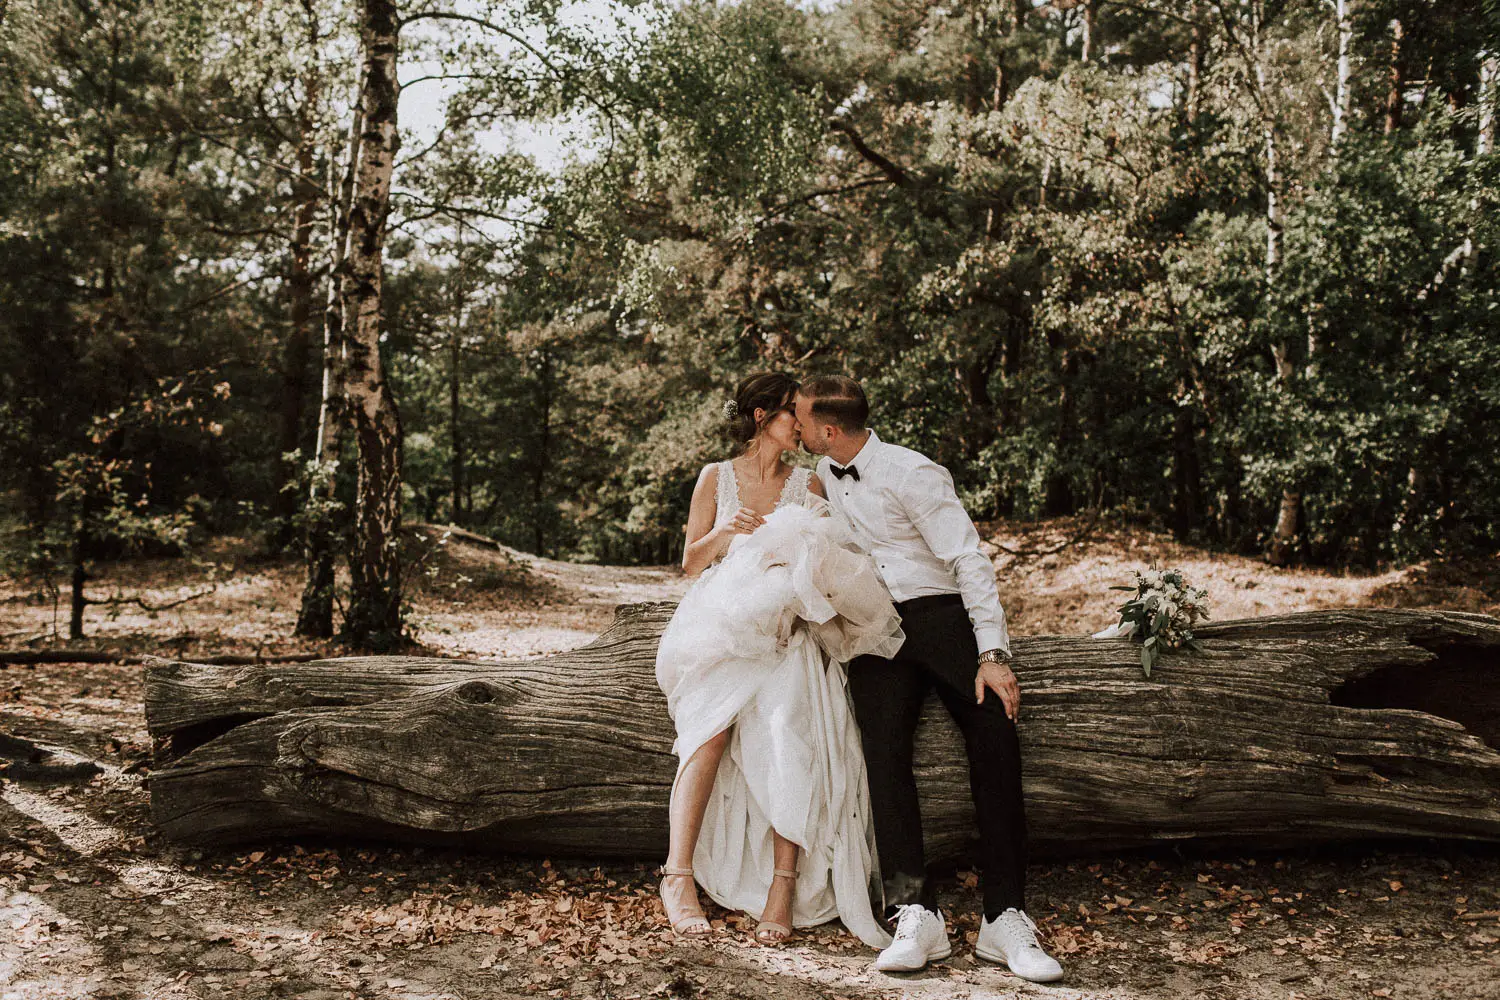 What a beautiful scenery. He kisses slightly her lips, while leaning against a tree trunk. So romantic!